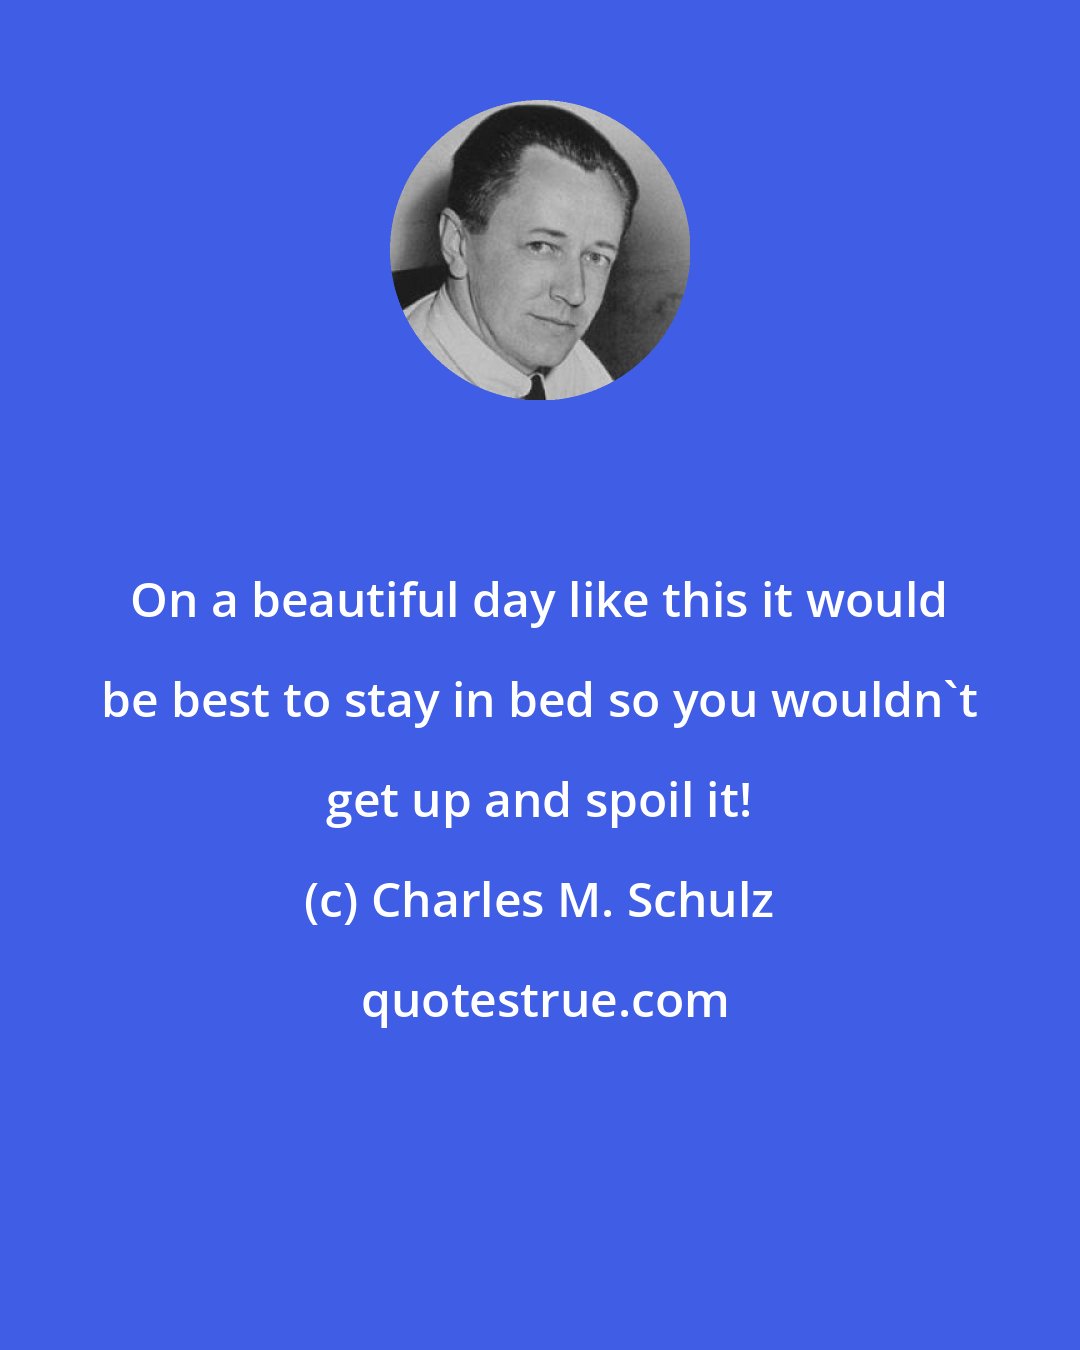 Charles M. Schulz: On a beautiful day like this it would be best to stay in bed so you wouldn't get up and spoil it!